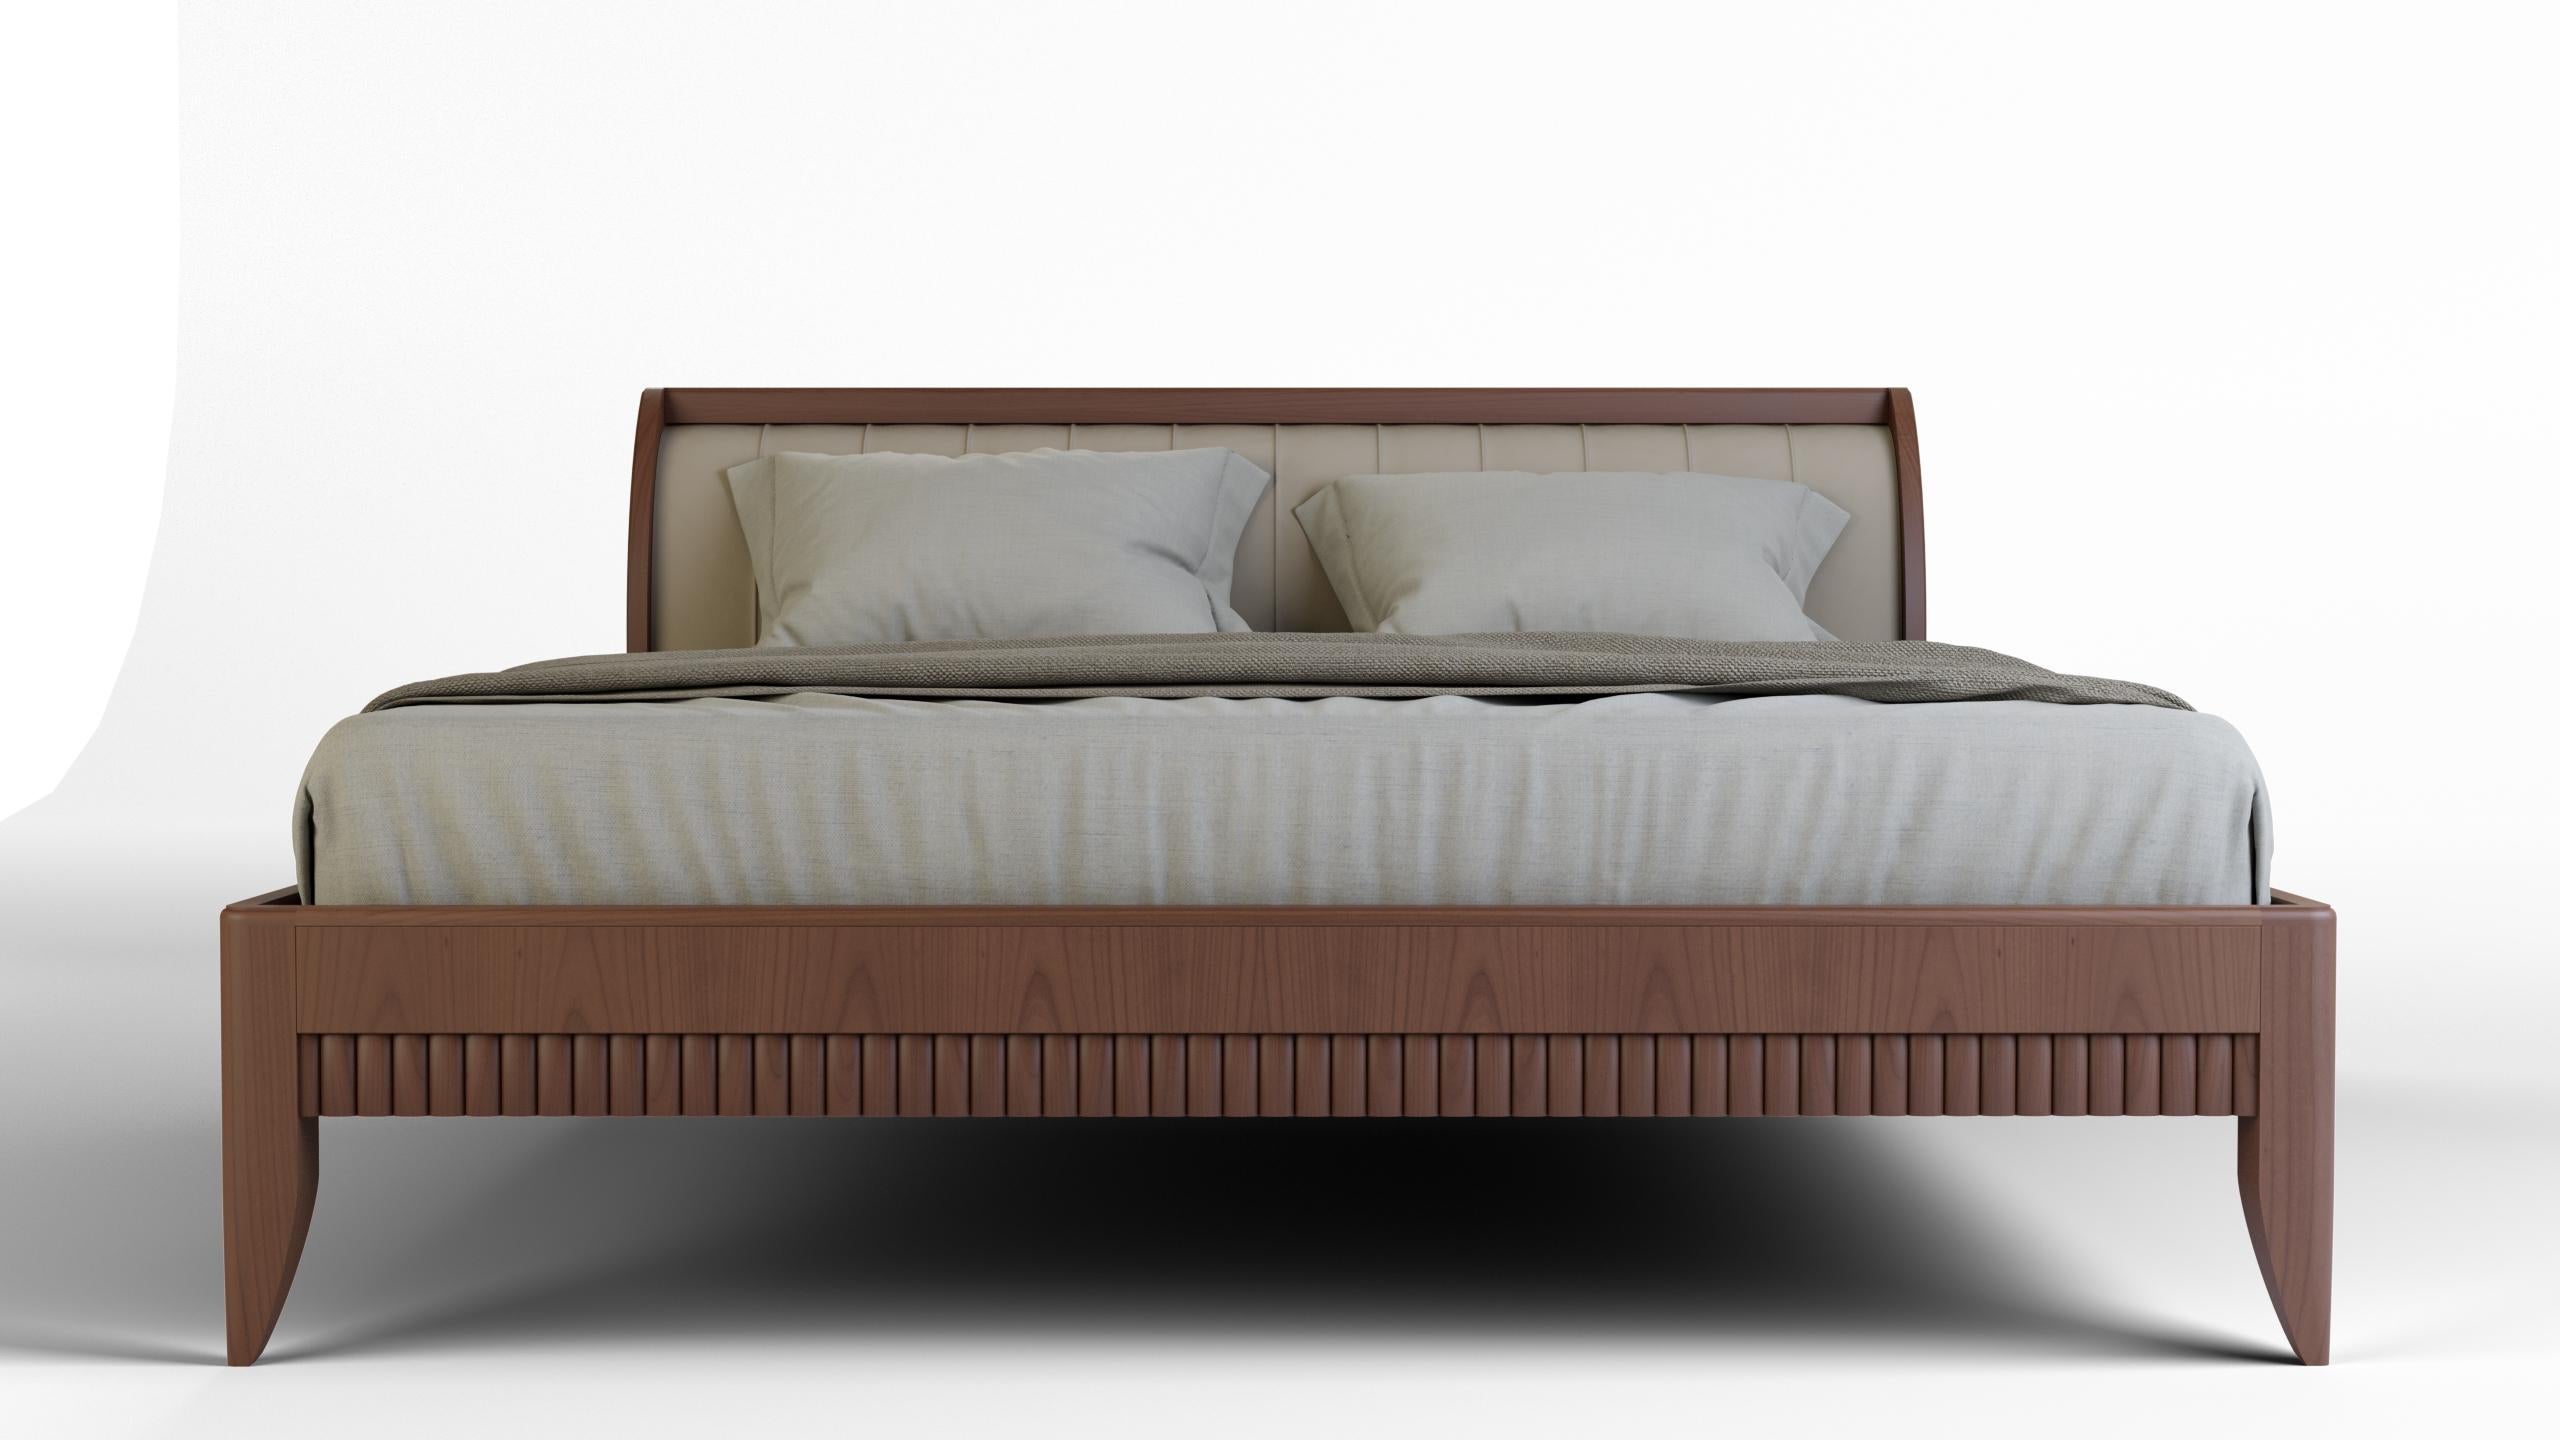 Italian Rulman by Morelato, Bed Made of Cherry Wood with Upholstered Headboard